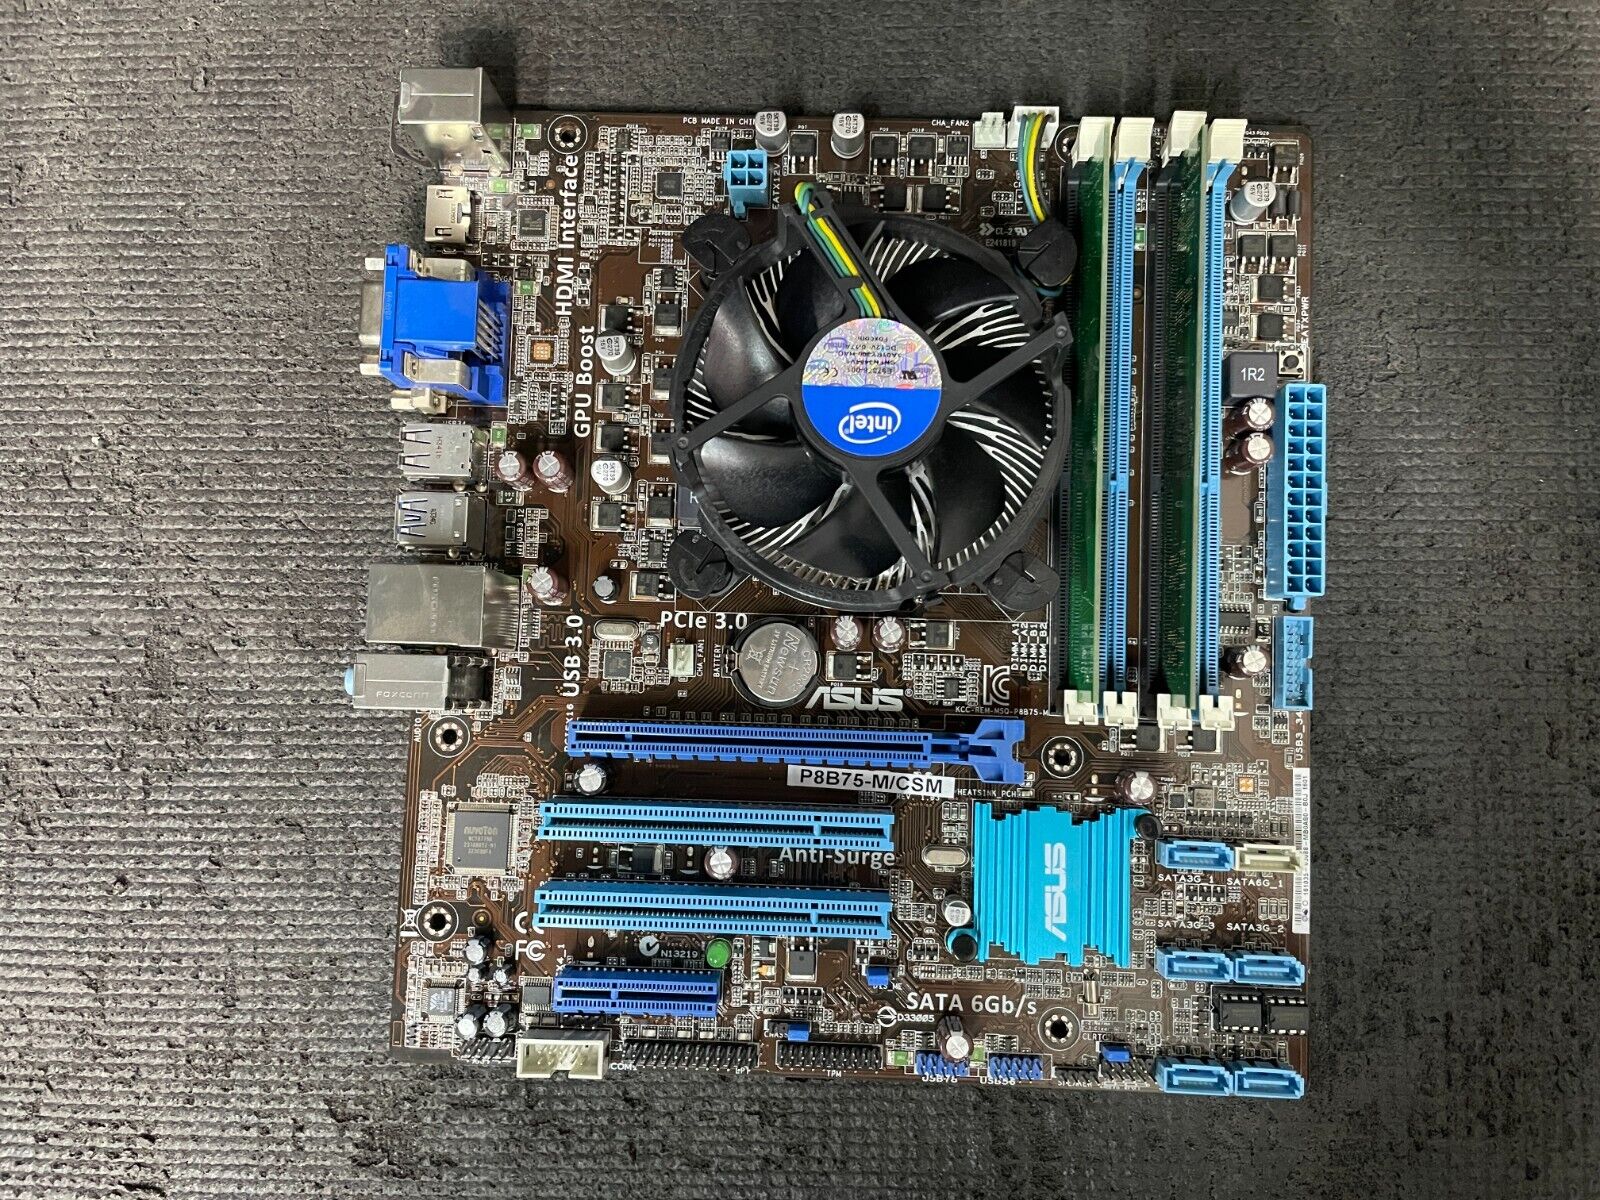 ASUS P8B75-M/CSM, LGA 1155 with Intel I7-3770K 3.50GHz 8GB RAM Heatsink and Fan